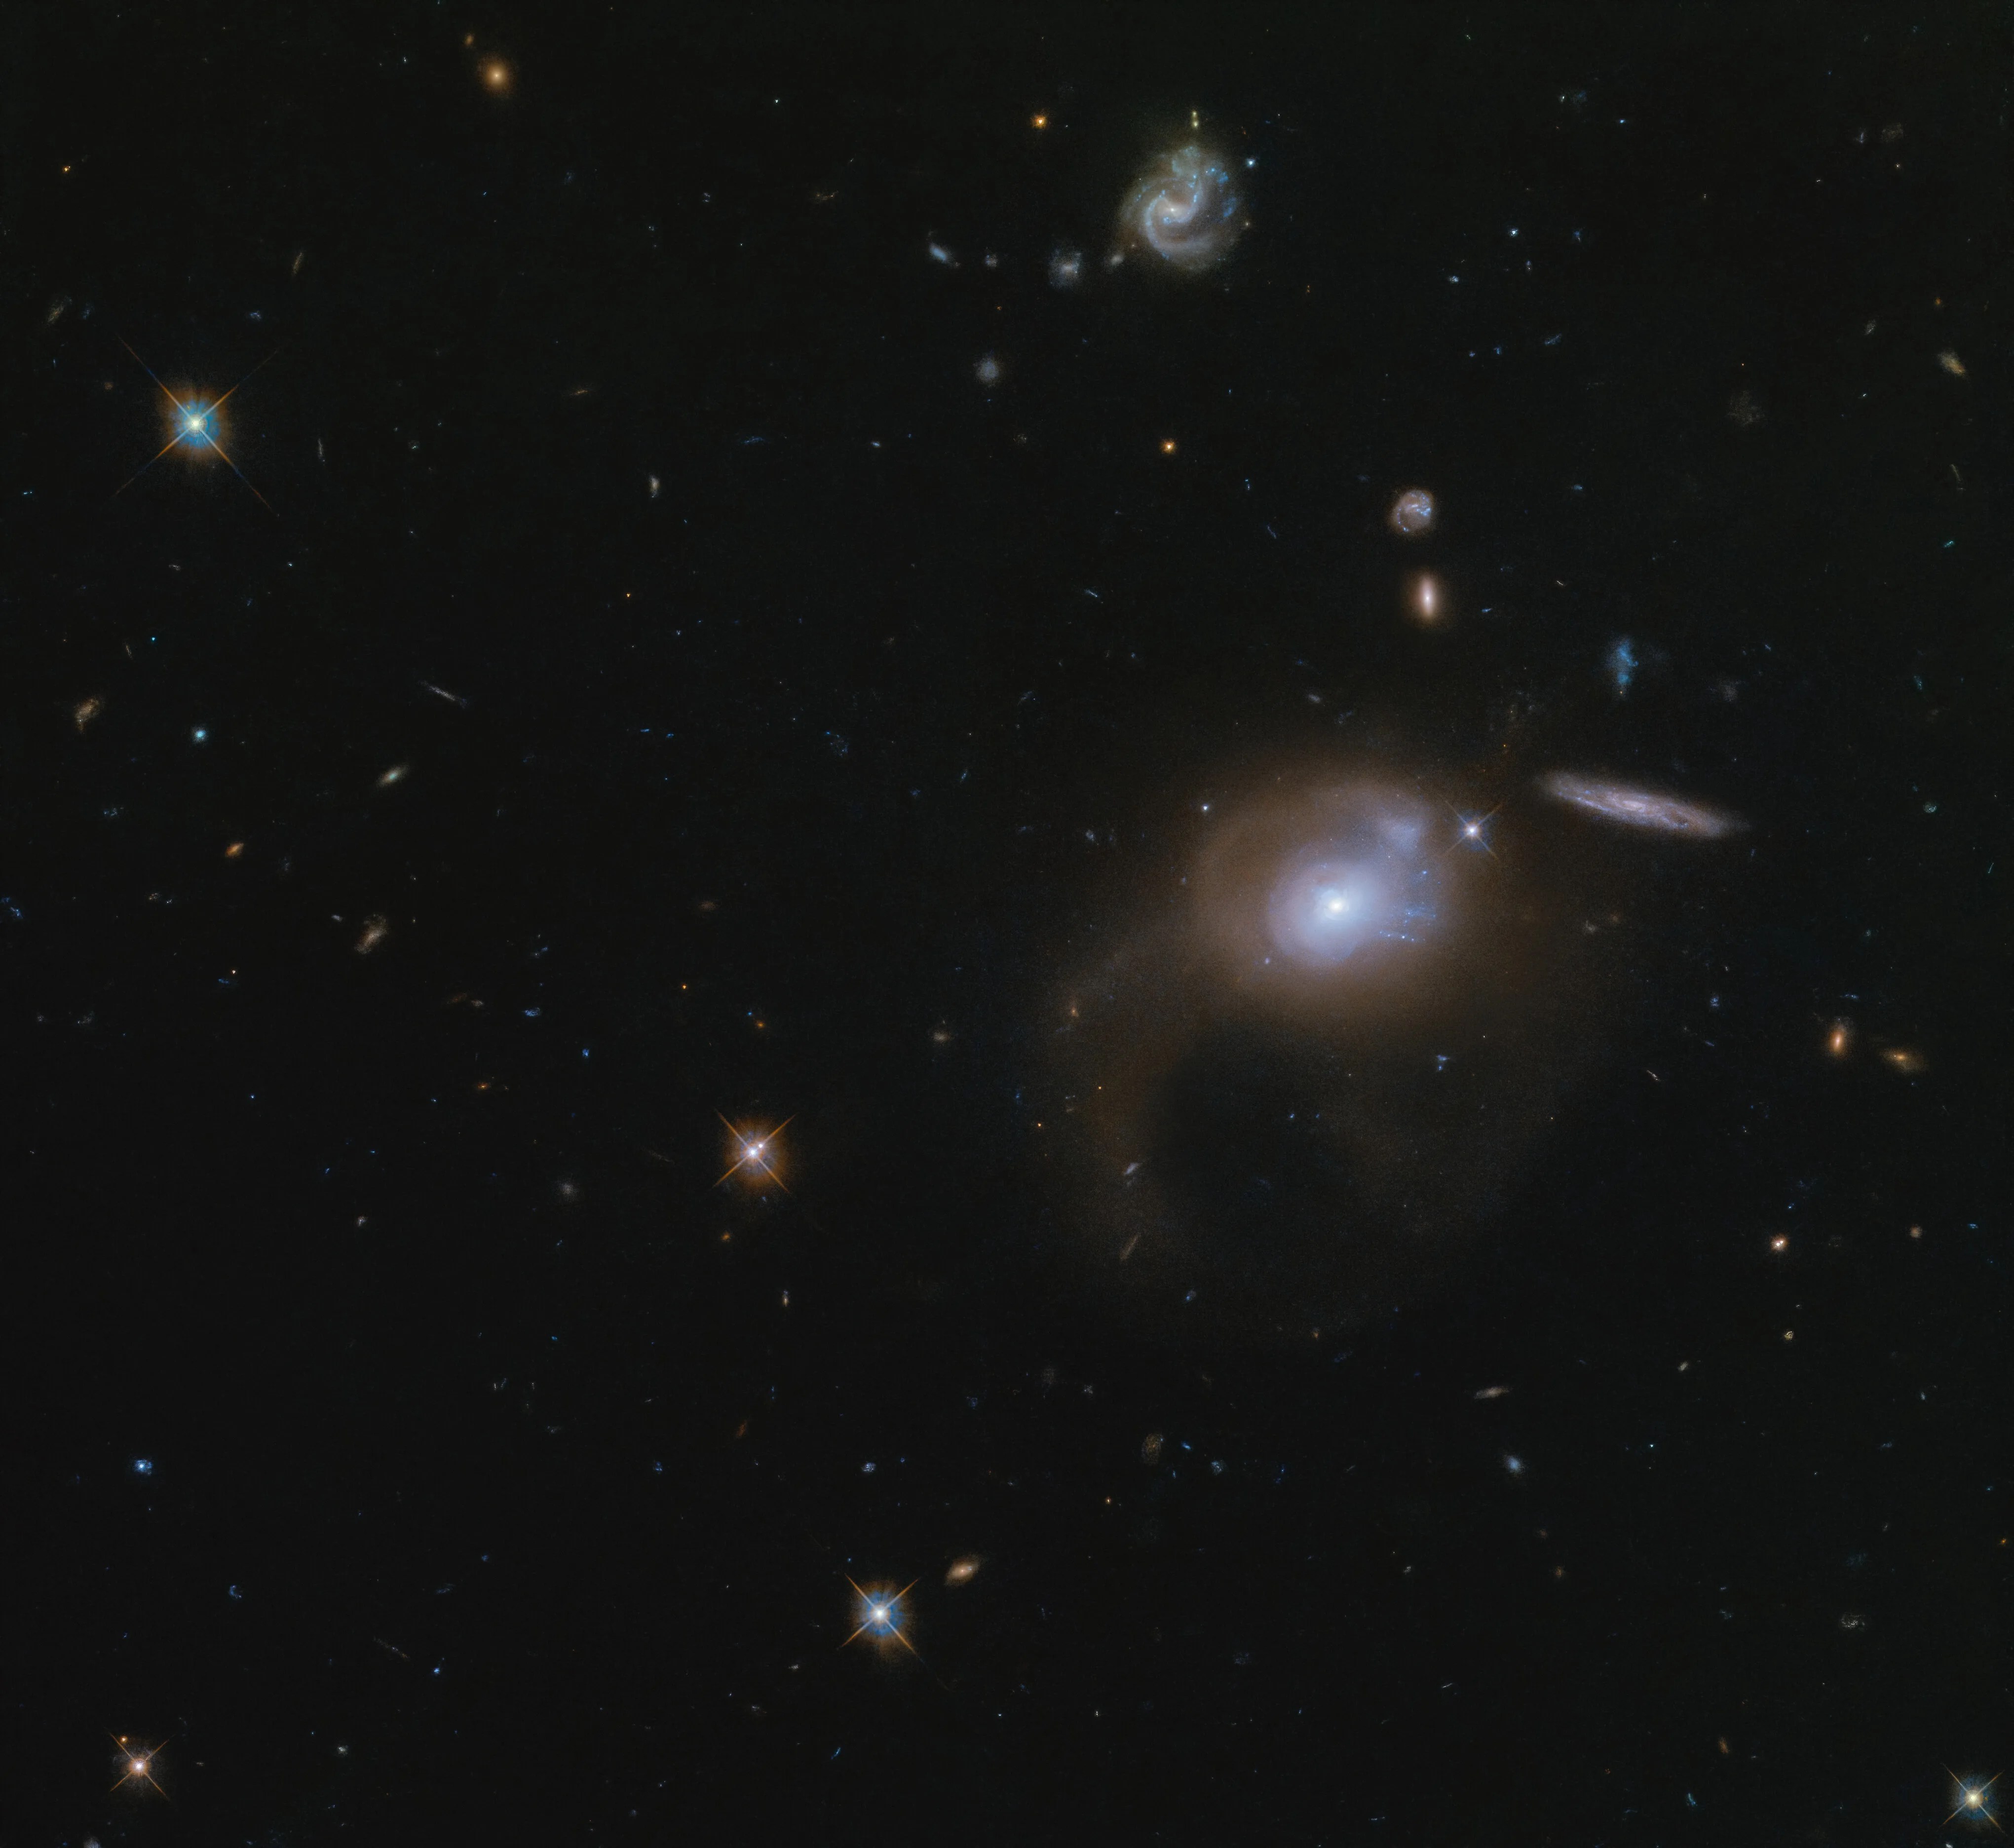 This large expanse of space captured with the hubble space telescope features the galaxy sdssj225506.80+005839.9.